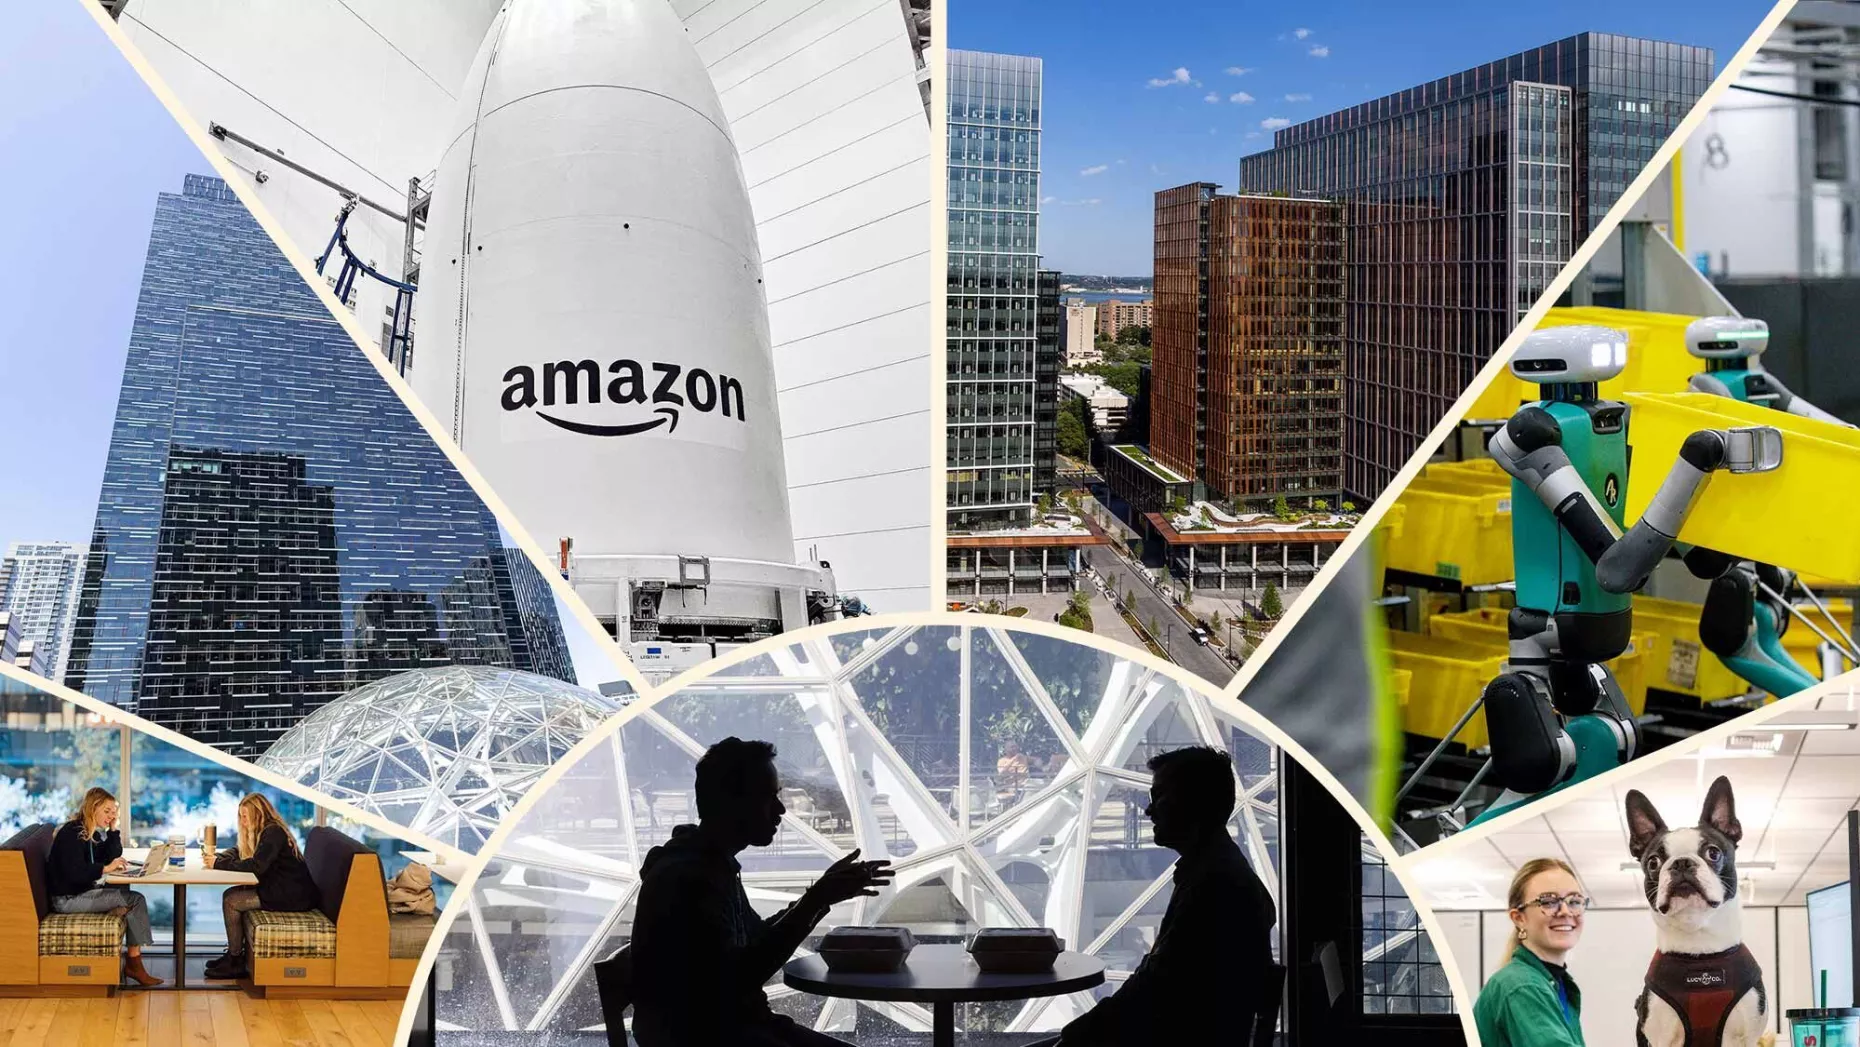 Amazon has been ranked among the world's most admired companies for the eighth year in a row by Fortune magazine.